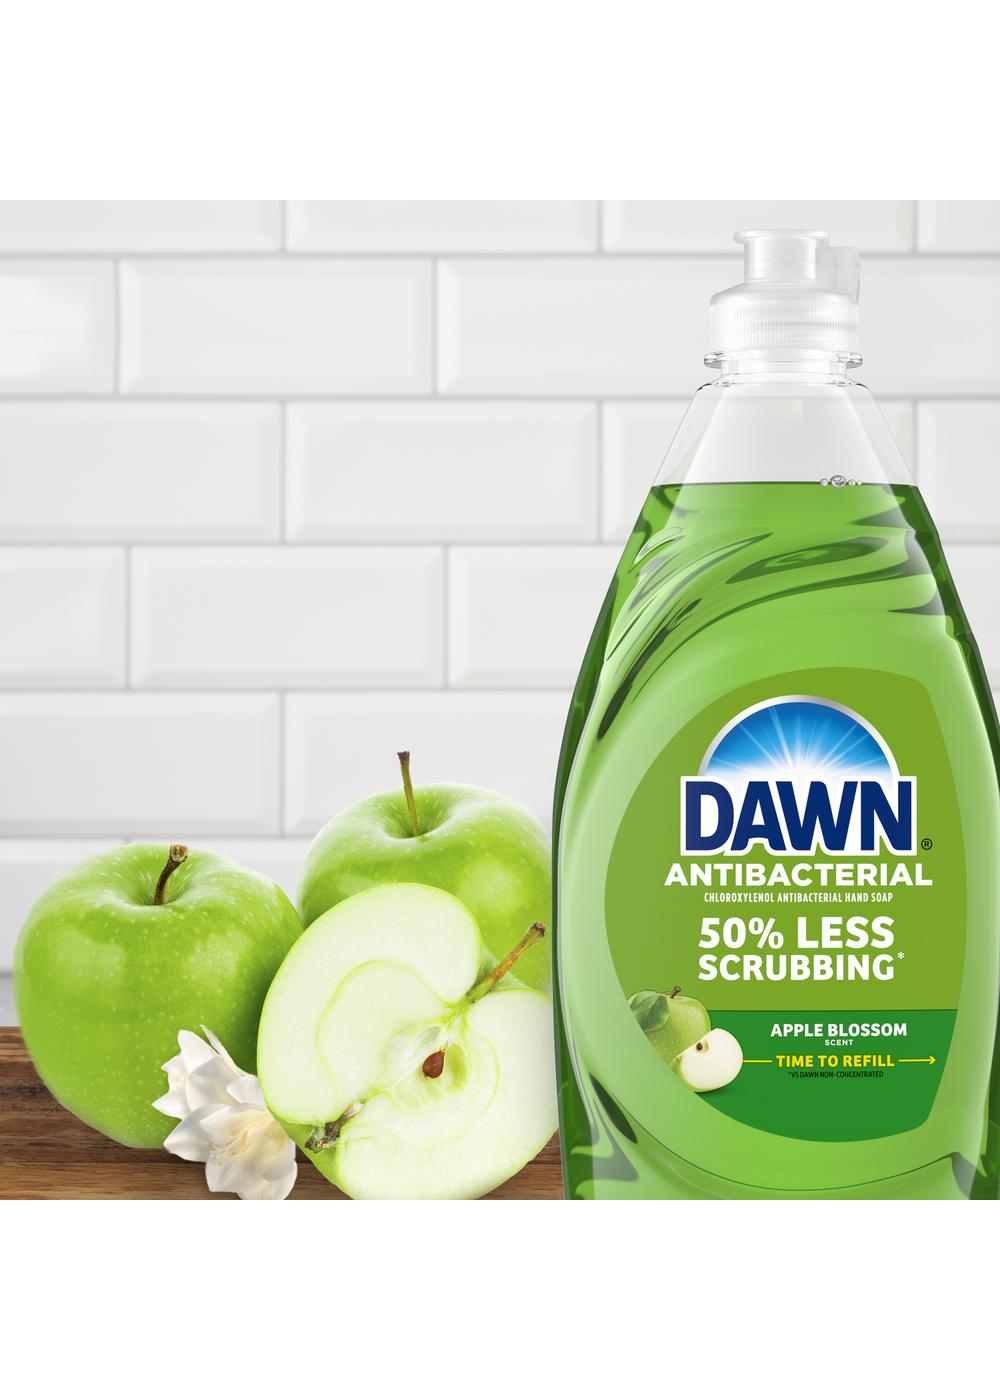 Dawn Ultra Antibacterial Hand Soap - Apple Blossom; image 9 of 10